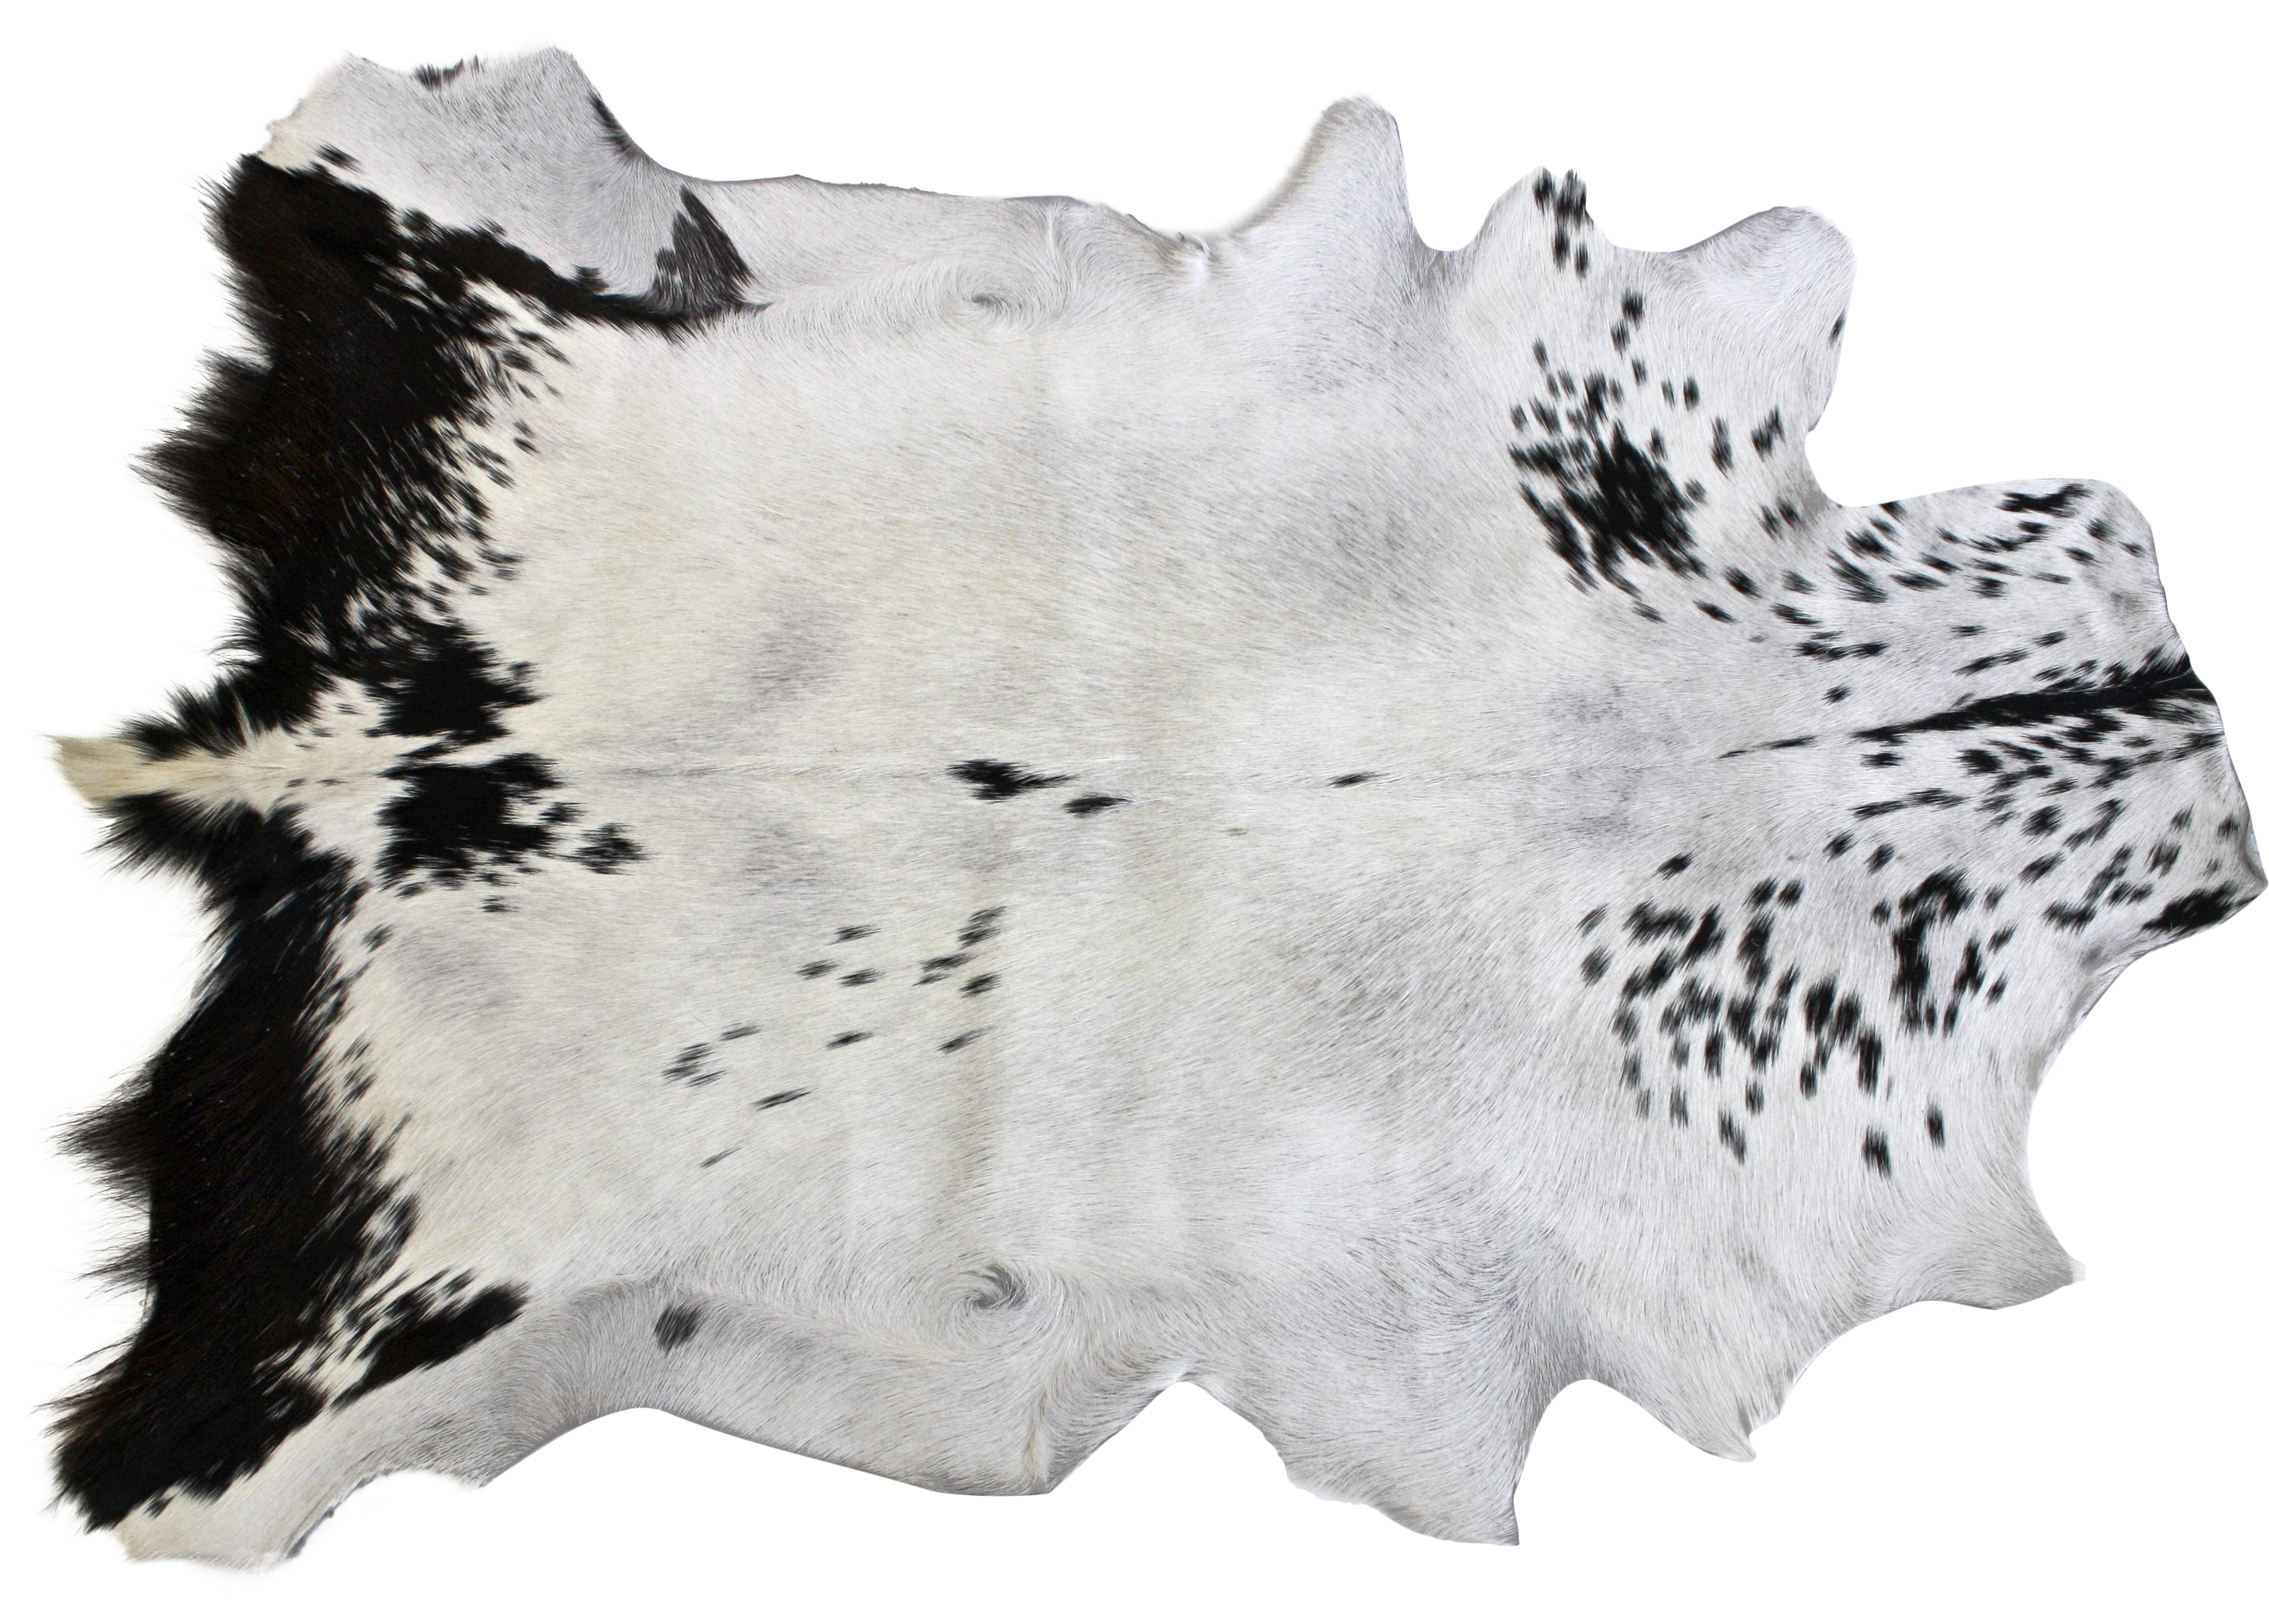 A Black And White Animal Skin